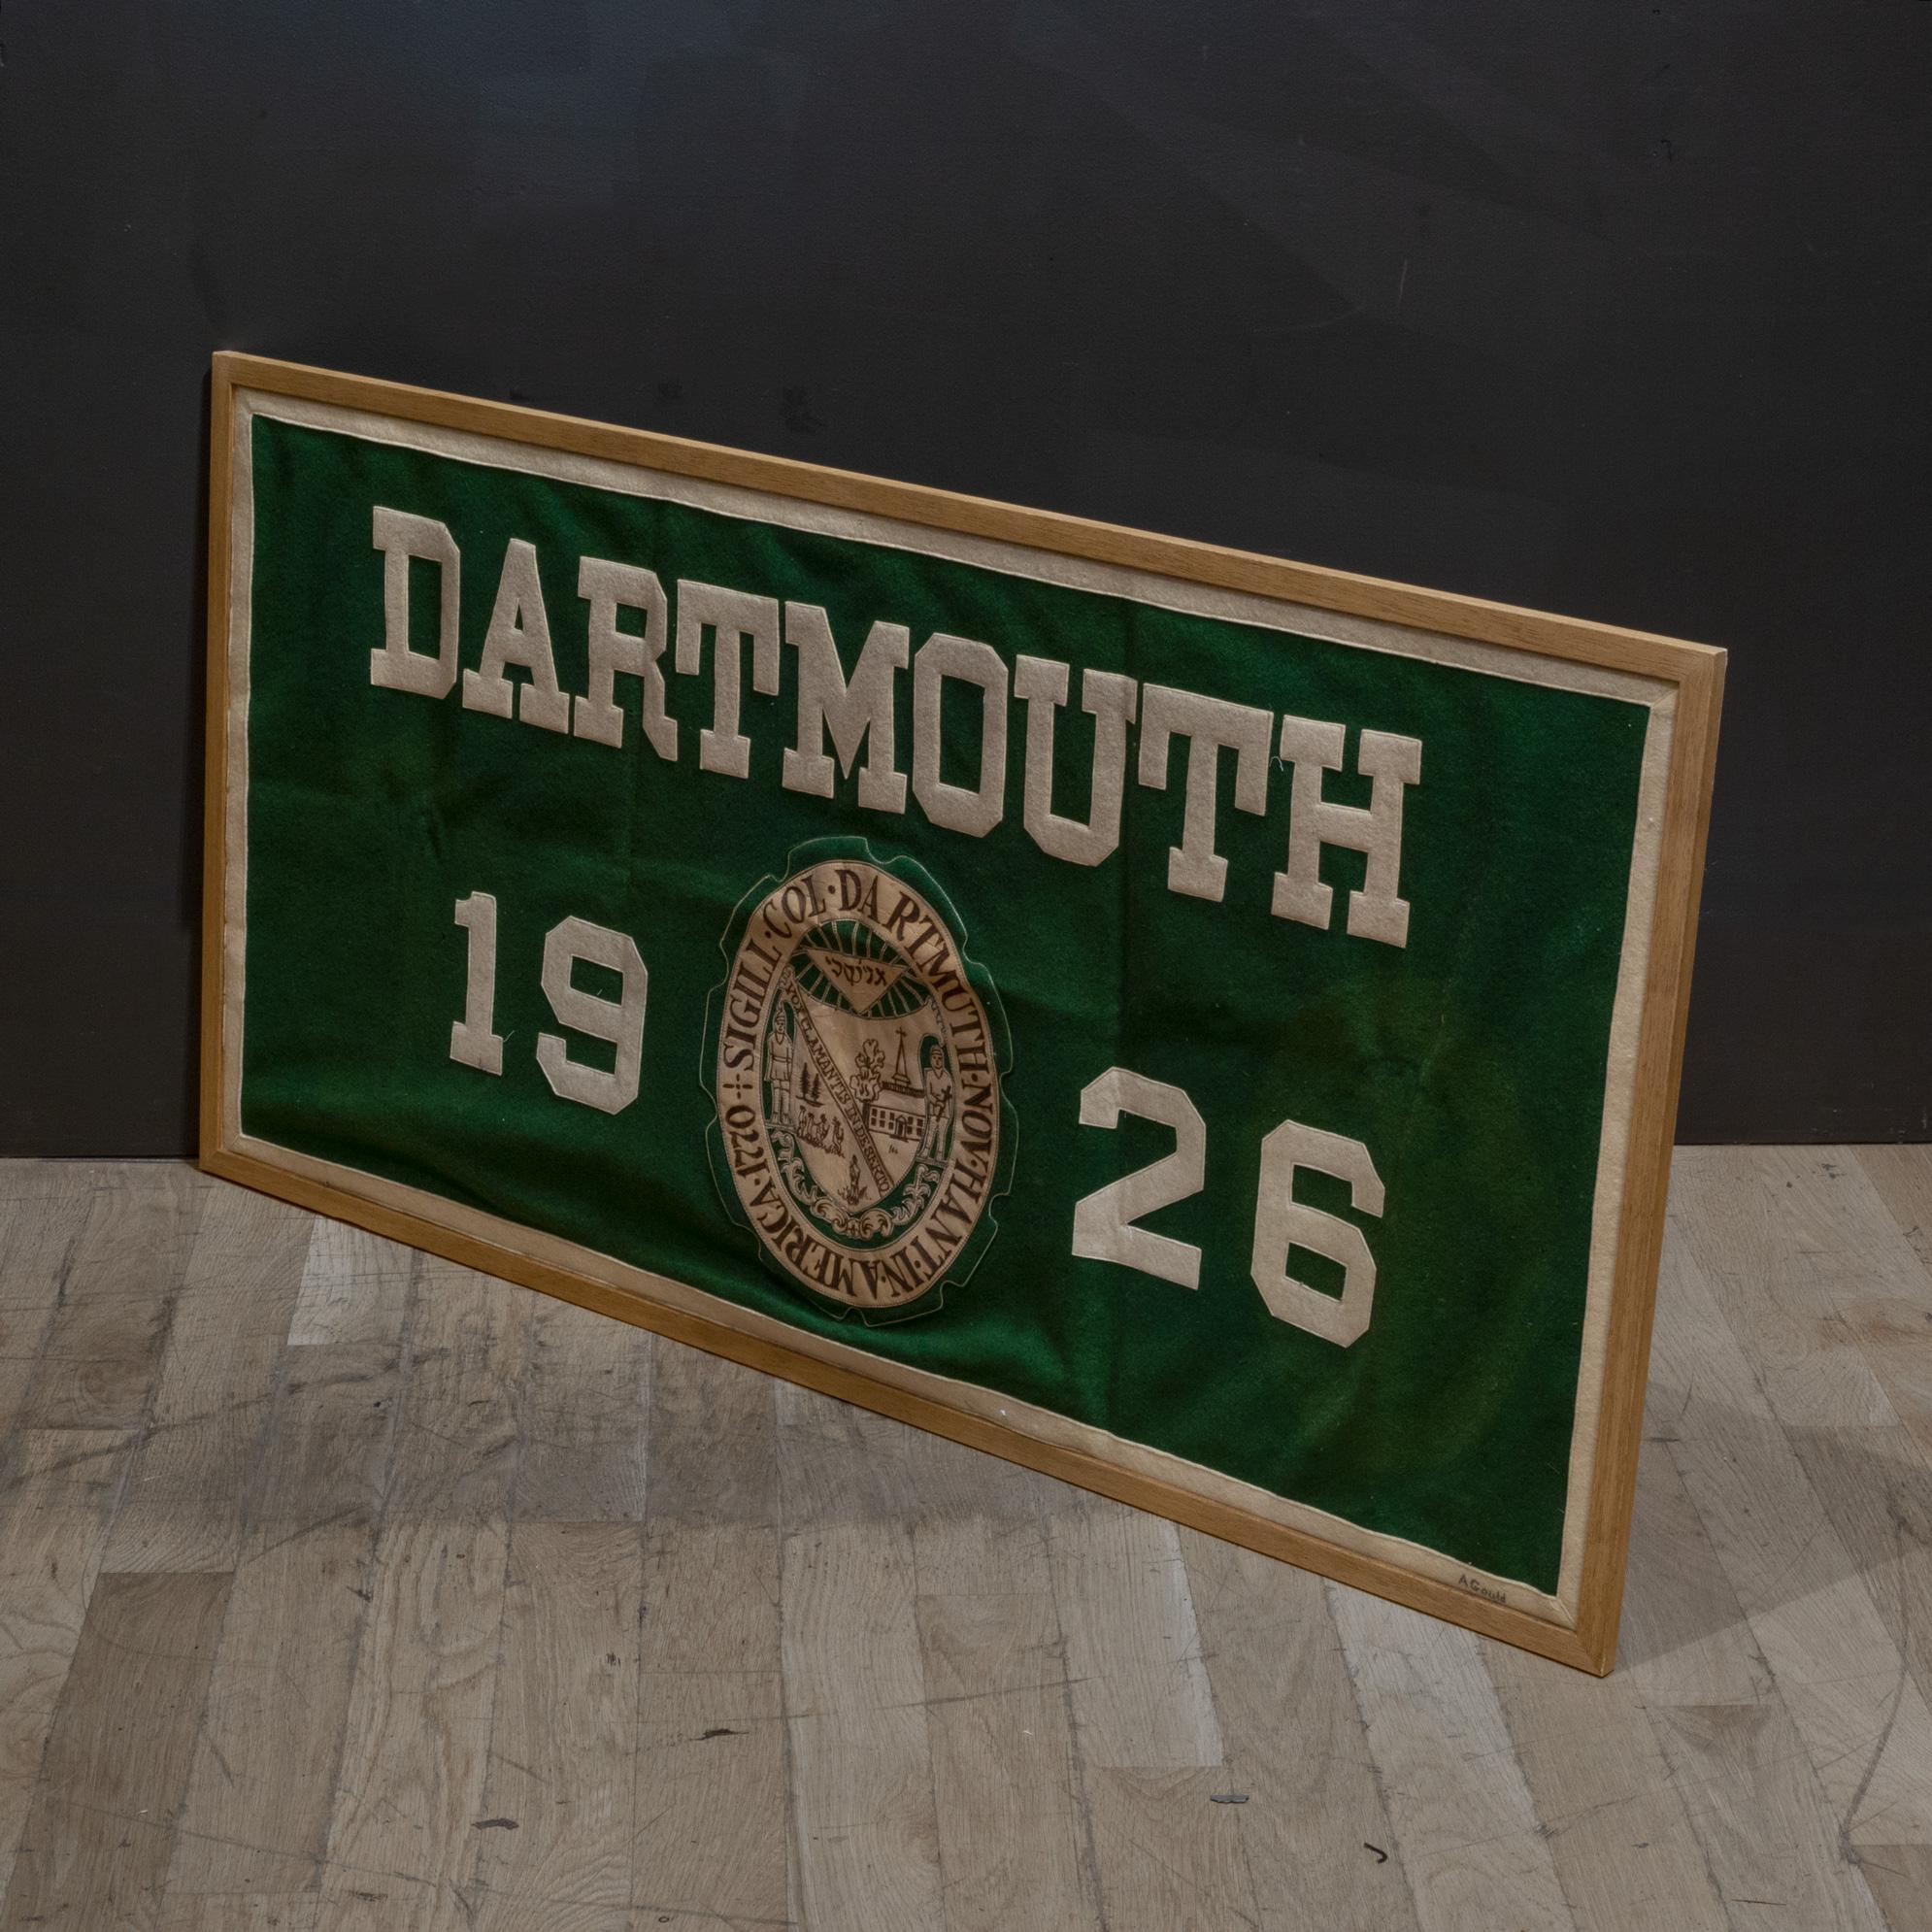 About
An original framed Dartmouth College wall banner signed by original owner.

Date of manufacture circa 1926.
Materials and techniques felt, wood.
Condition good. Wear consistent with age and use. Several small moth holes.
Dimensions H